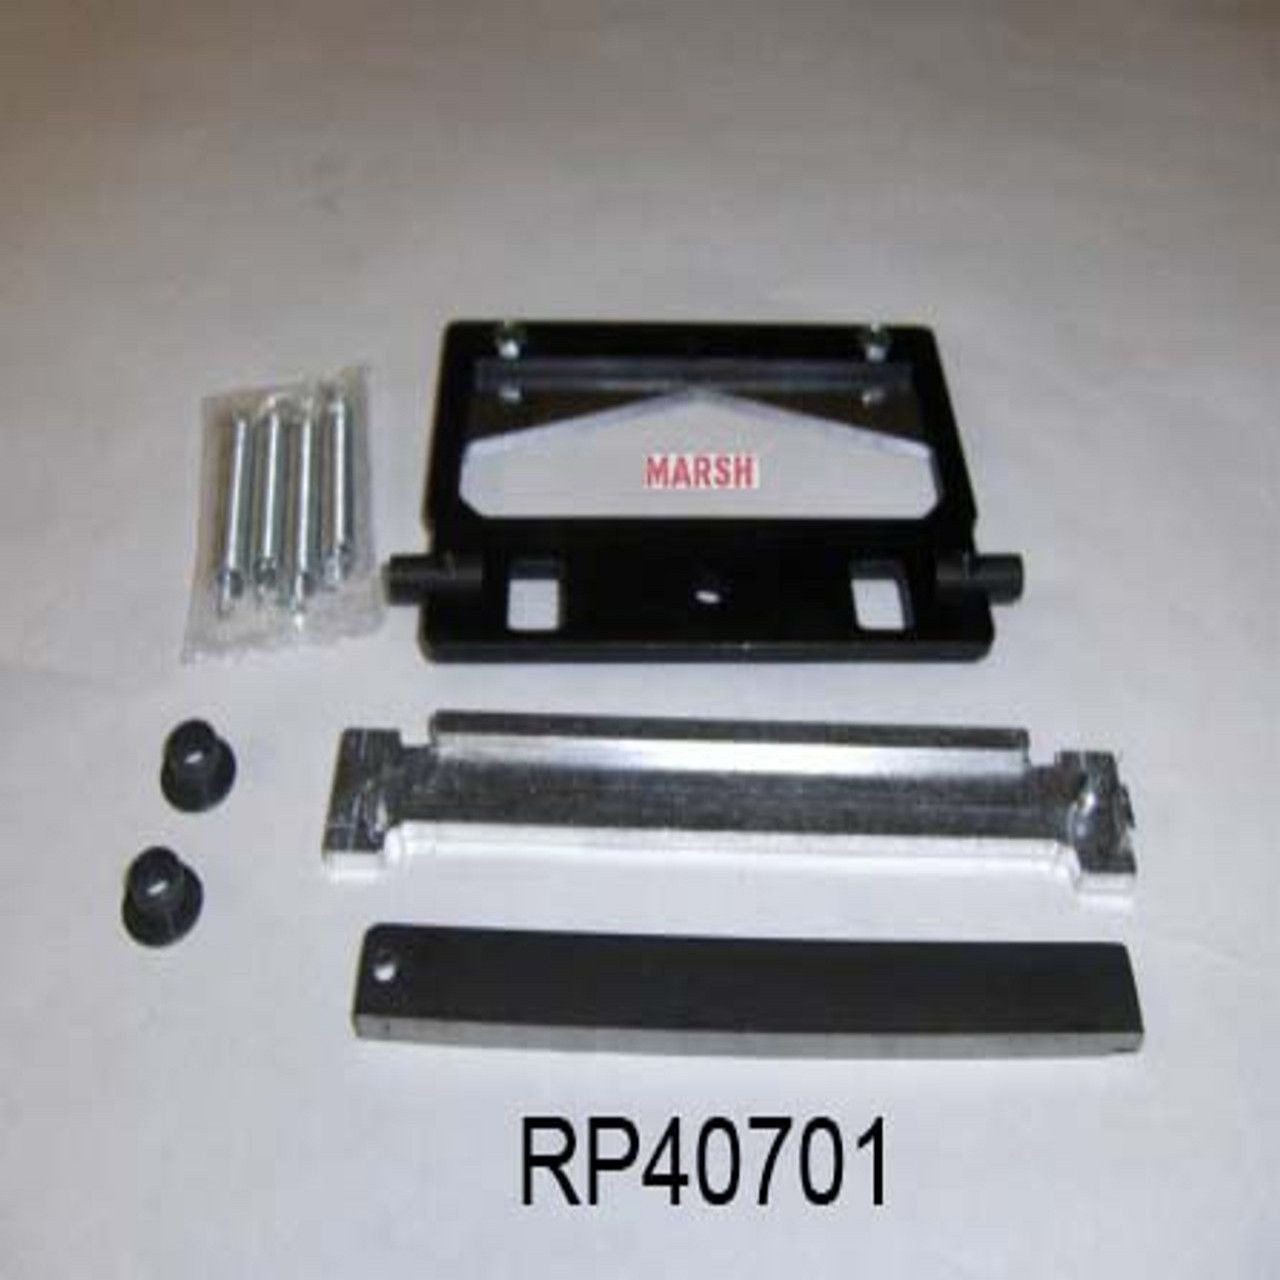 Marsh Part RP40701 (CUTTER REPLACEMENT KIT TD2100)